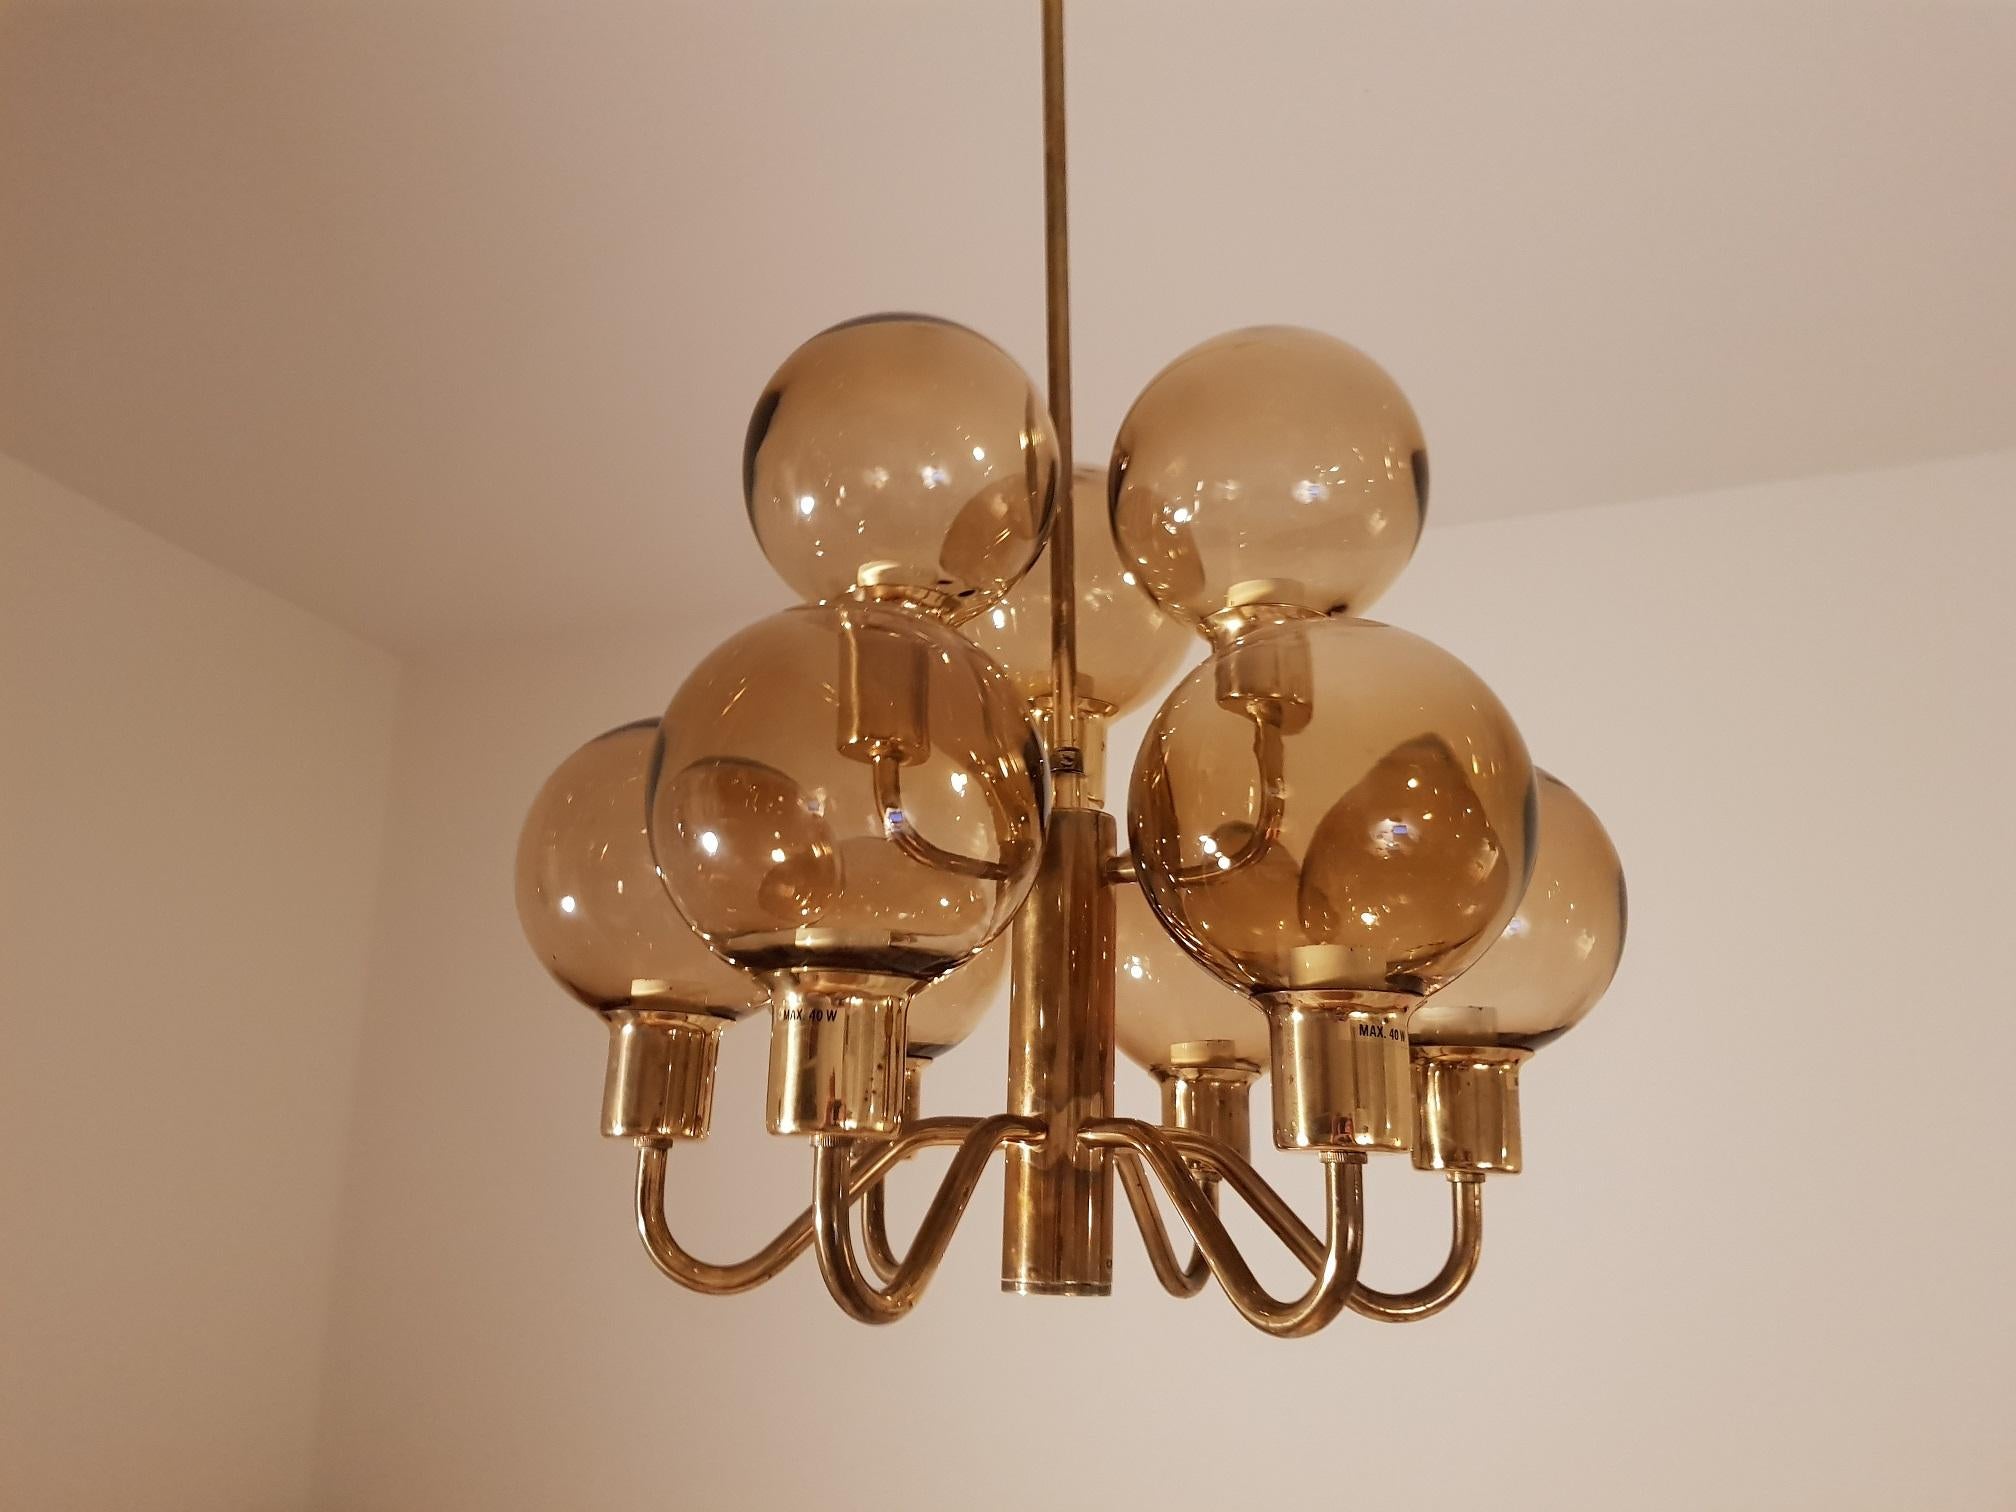 1 beautiful vintage ceiling lamp in brass and smoked glass. Rare model that is not often for sale. Produced in the 1960s by Hans-Agne Jakobsson AB in Markaryd Sweden. A total of 9 light sources. Each glass case is 12 cm in diameter. Scandinavian